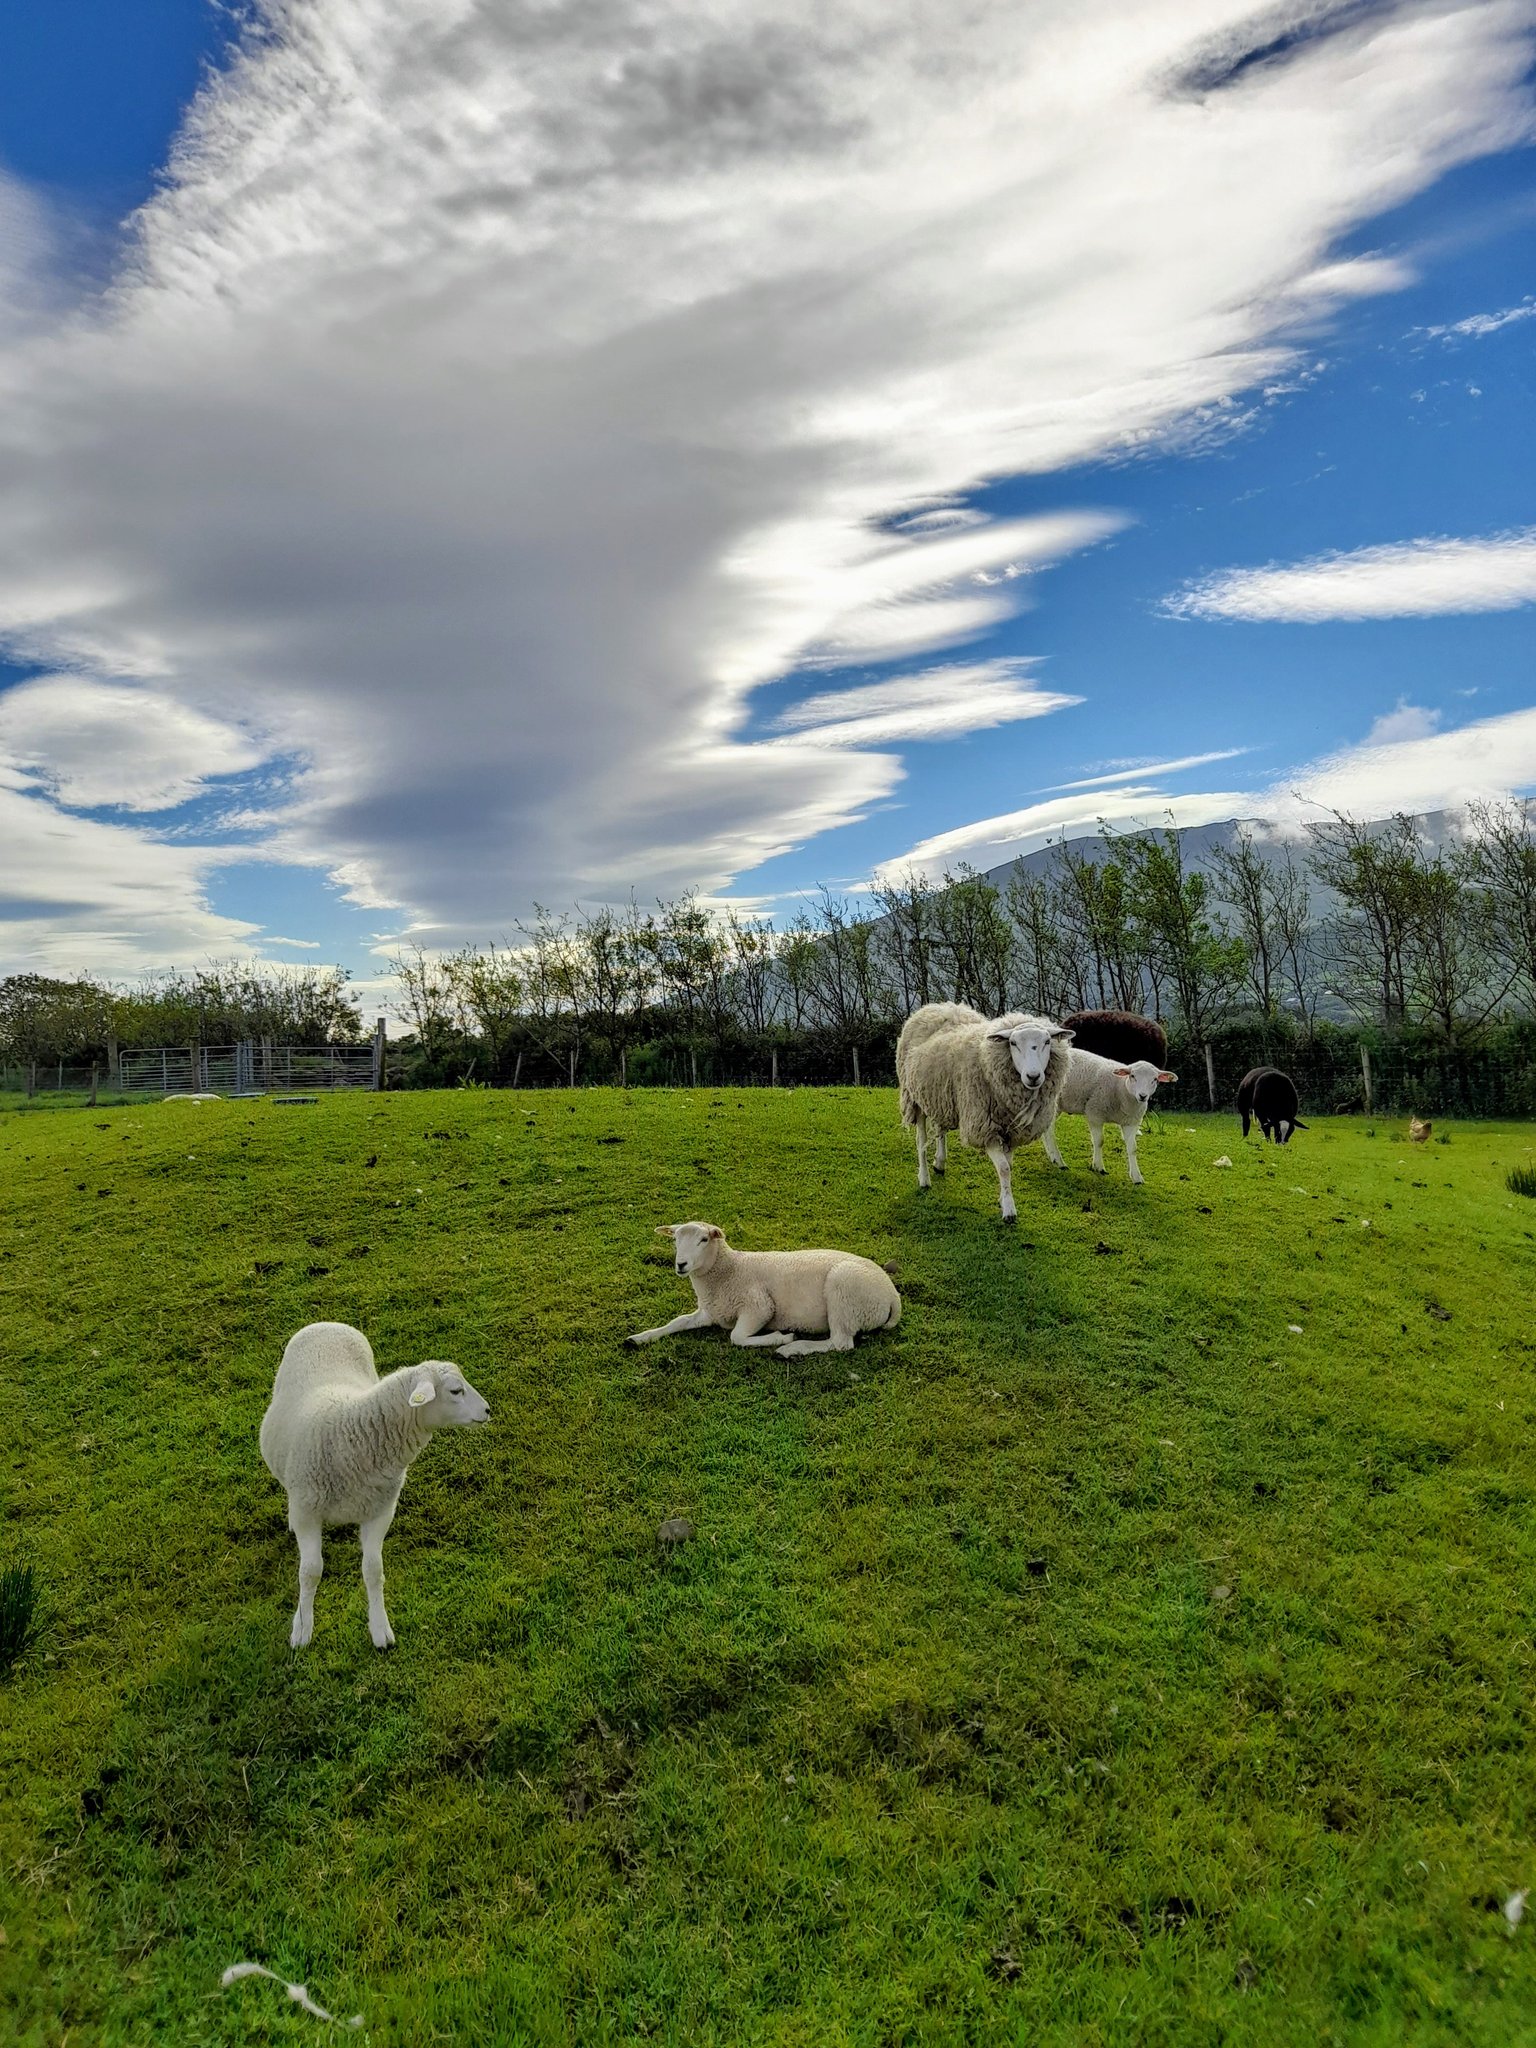 3rd Place Fluffy Clouds and Fluffy Sheep by Gill @GillianLouiseD